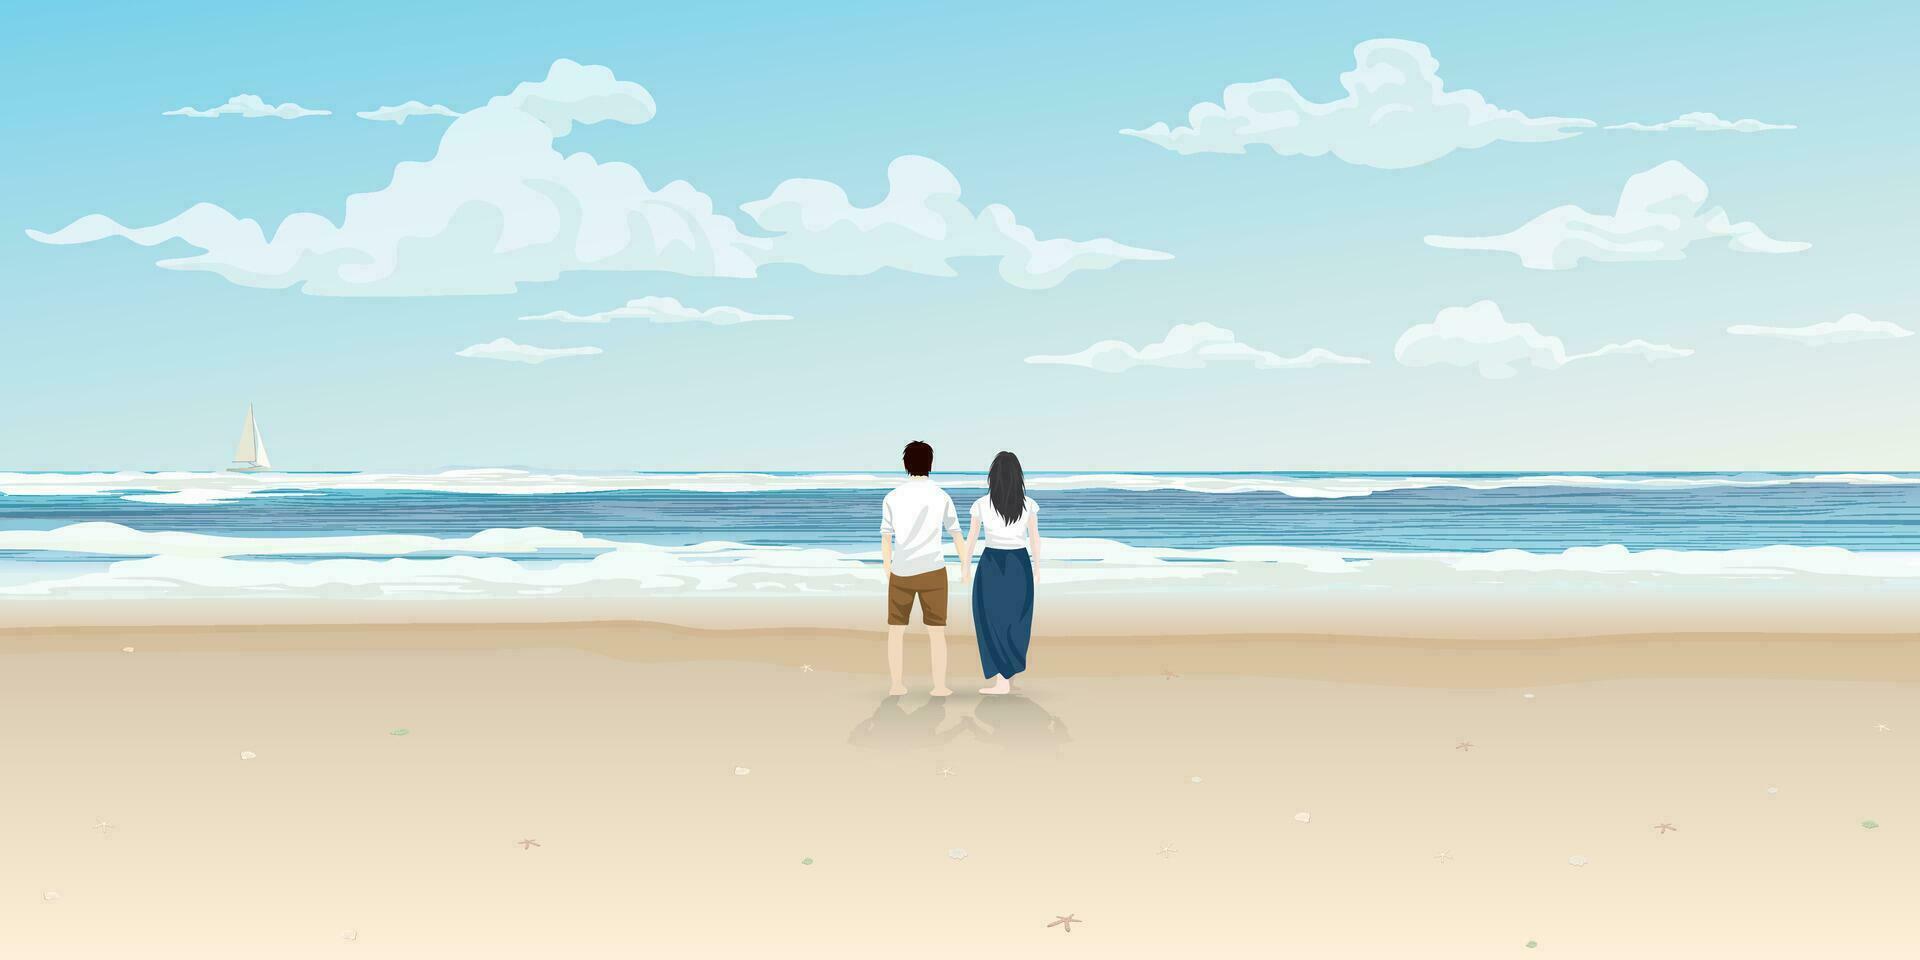 Couple of lover at the beach and tropical blue sea vector illustration. Journey of sweetheart concept flat design.